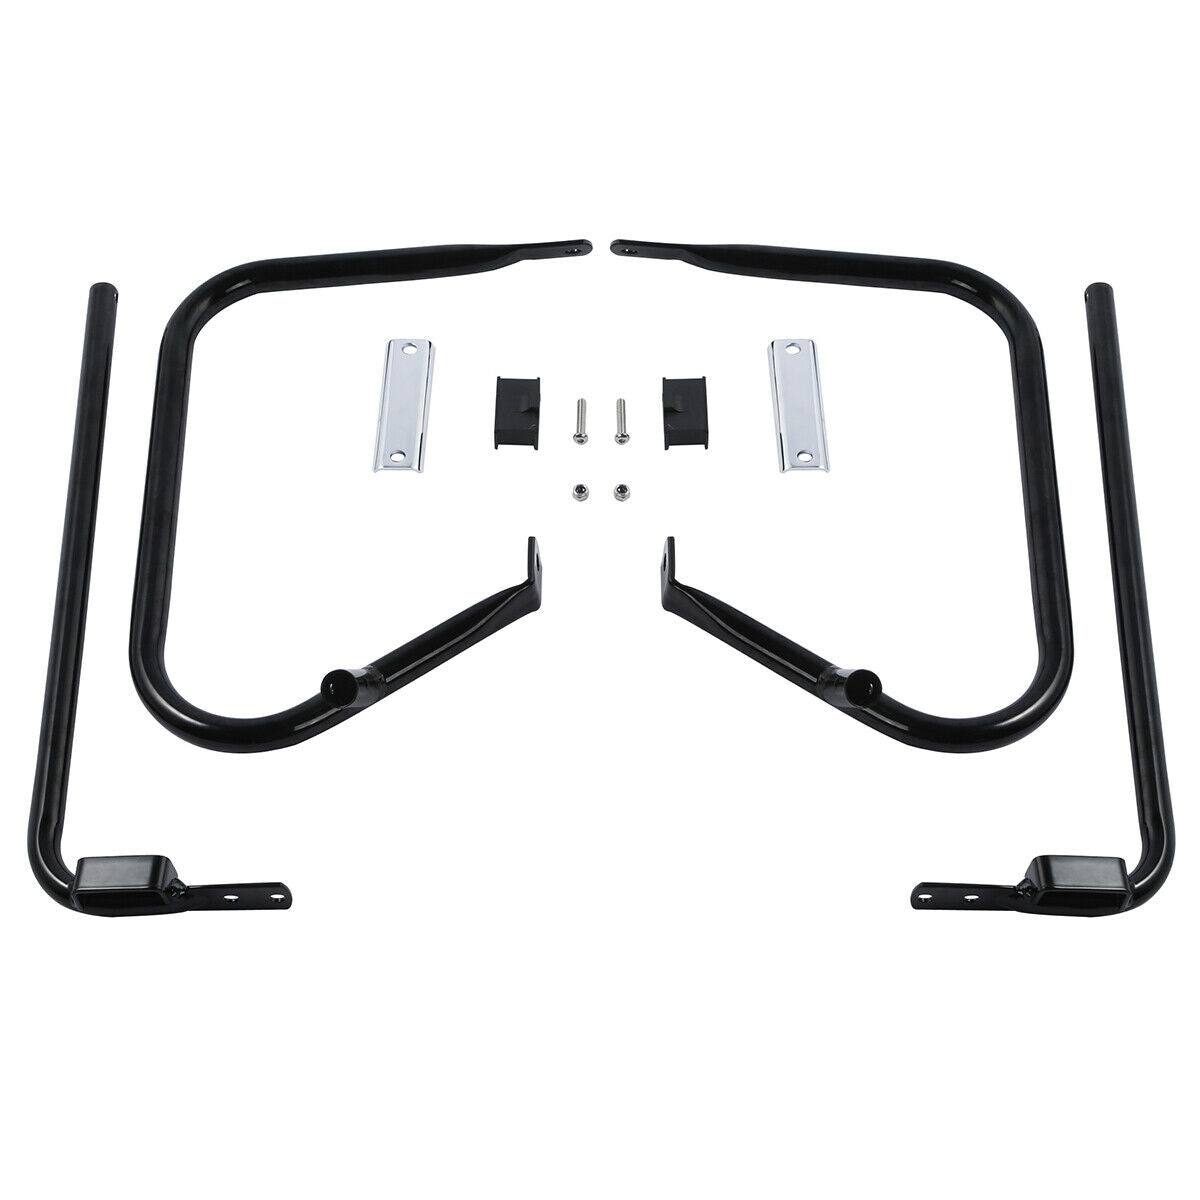 Saddlebags Guard Bar Bracket Fit For Harley Touring Road Street Glide 1997-2008 - Moto Life Products